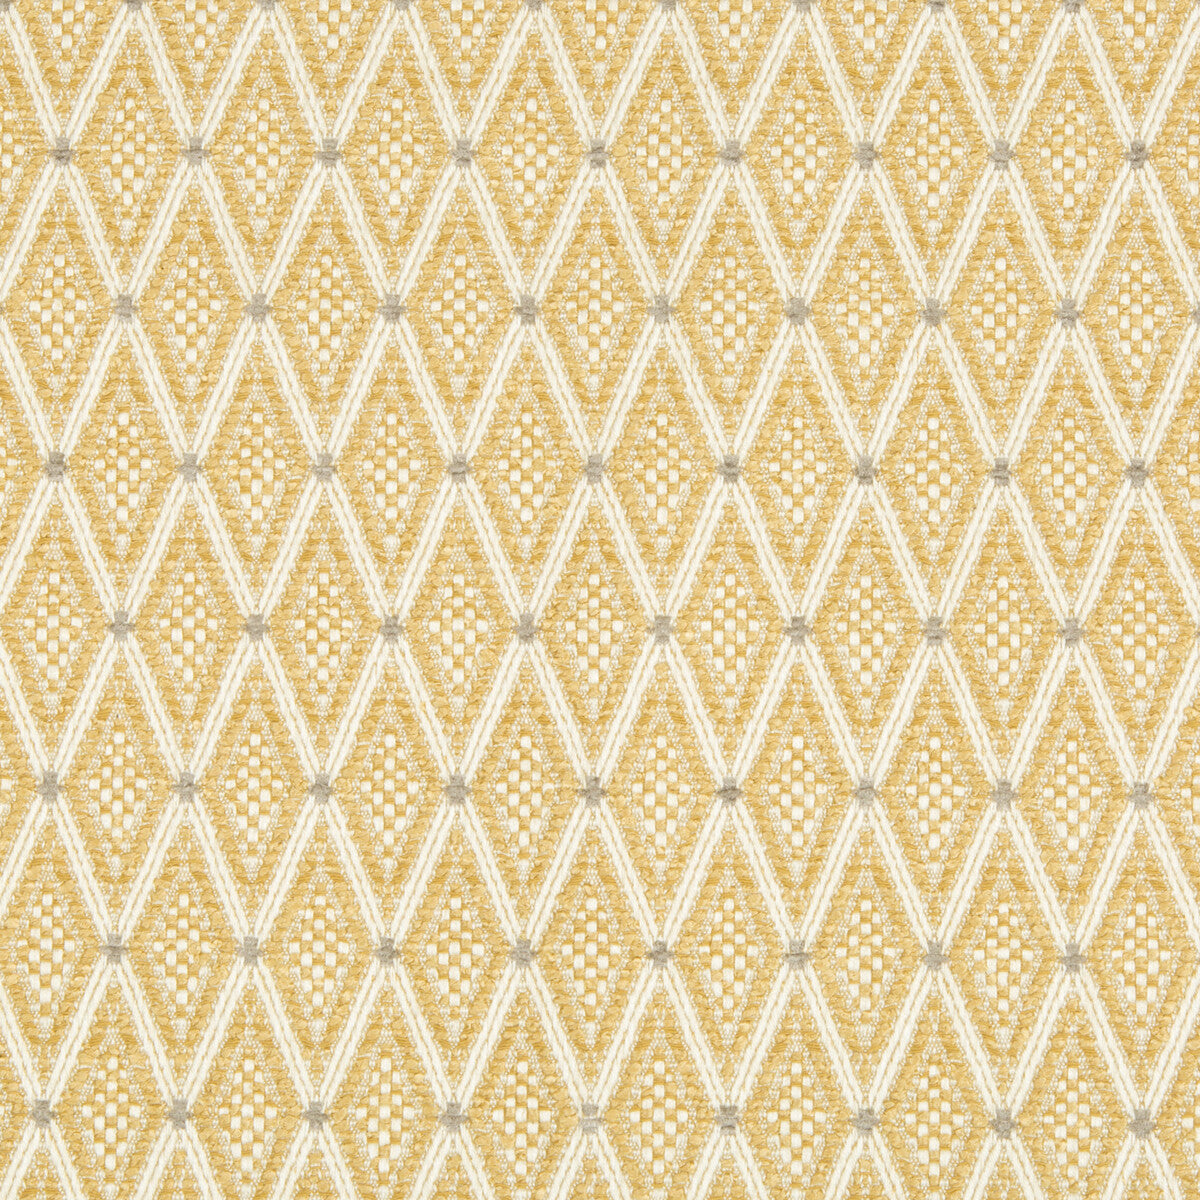 Kravet Contract fabric in 34744-16 color - pattern 34744.16.0 - by Kravet Contract in the Crypton Incase collection